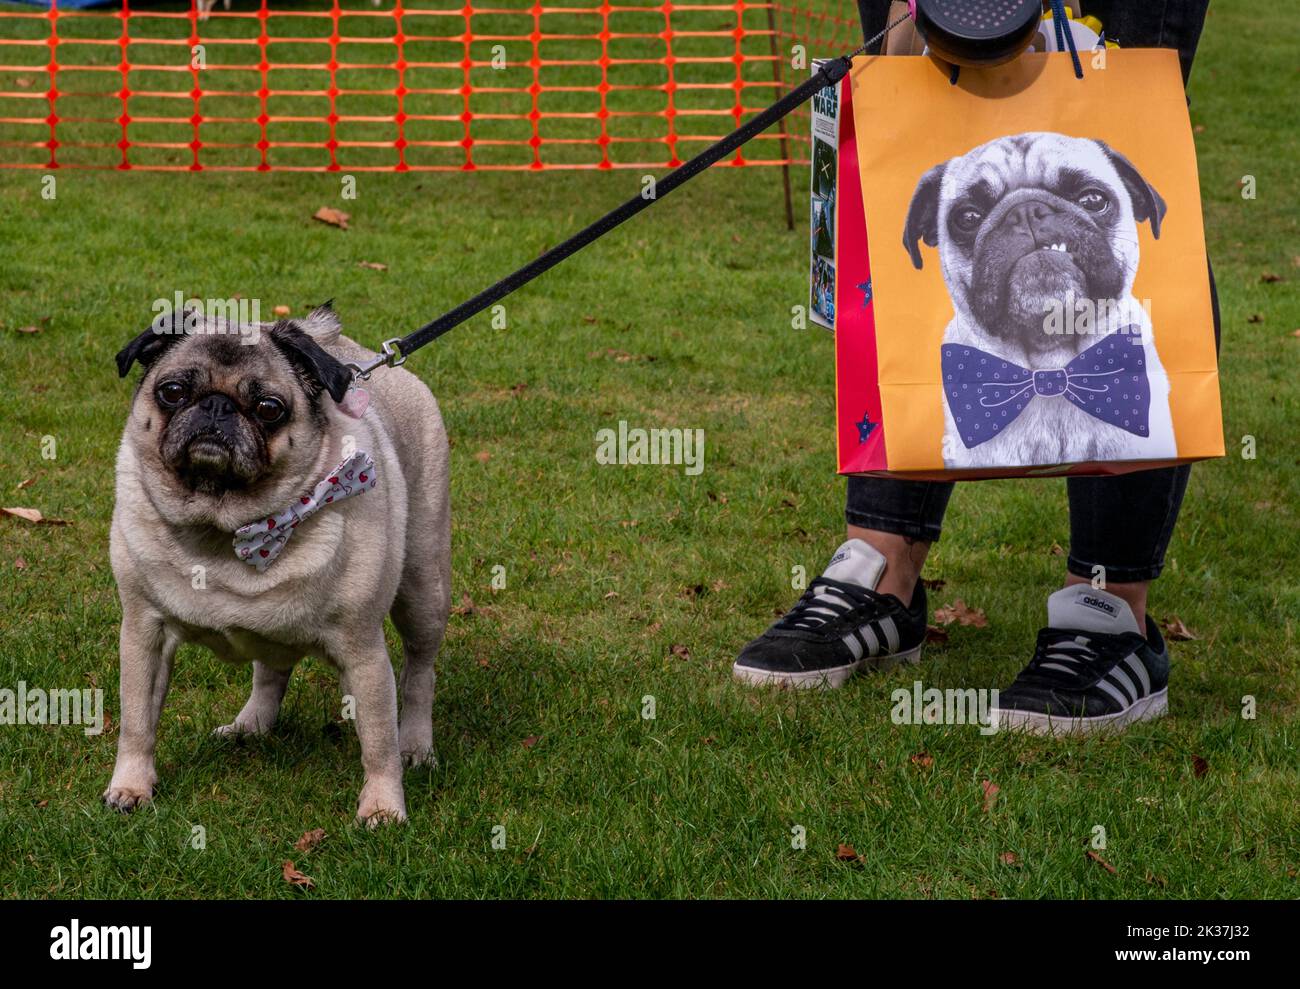 Follifoot, near Harrogate, North Yorkshire, 25th September 2022. The Follifoot Dog Festival where dog lovers were able to show off their beloved pets today. Pug Jess with a lookalike on a carrier bag! Picture Credit: ernesto rogata/Alamy Live News Stock Photo